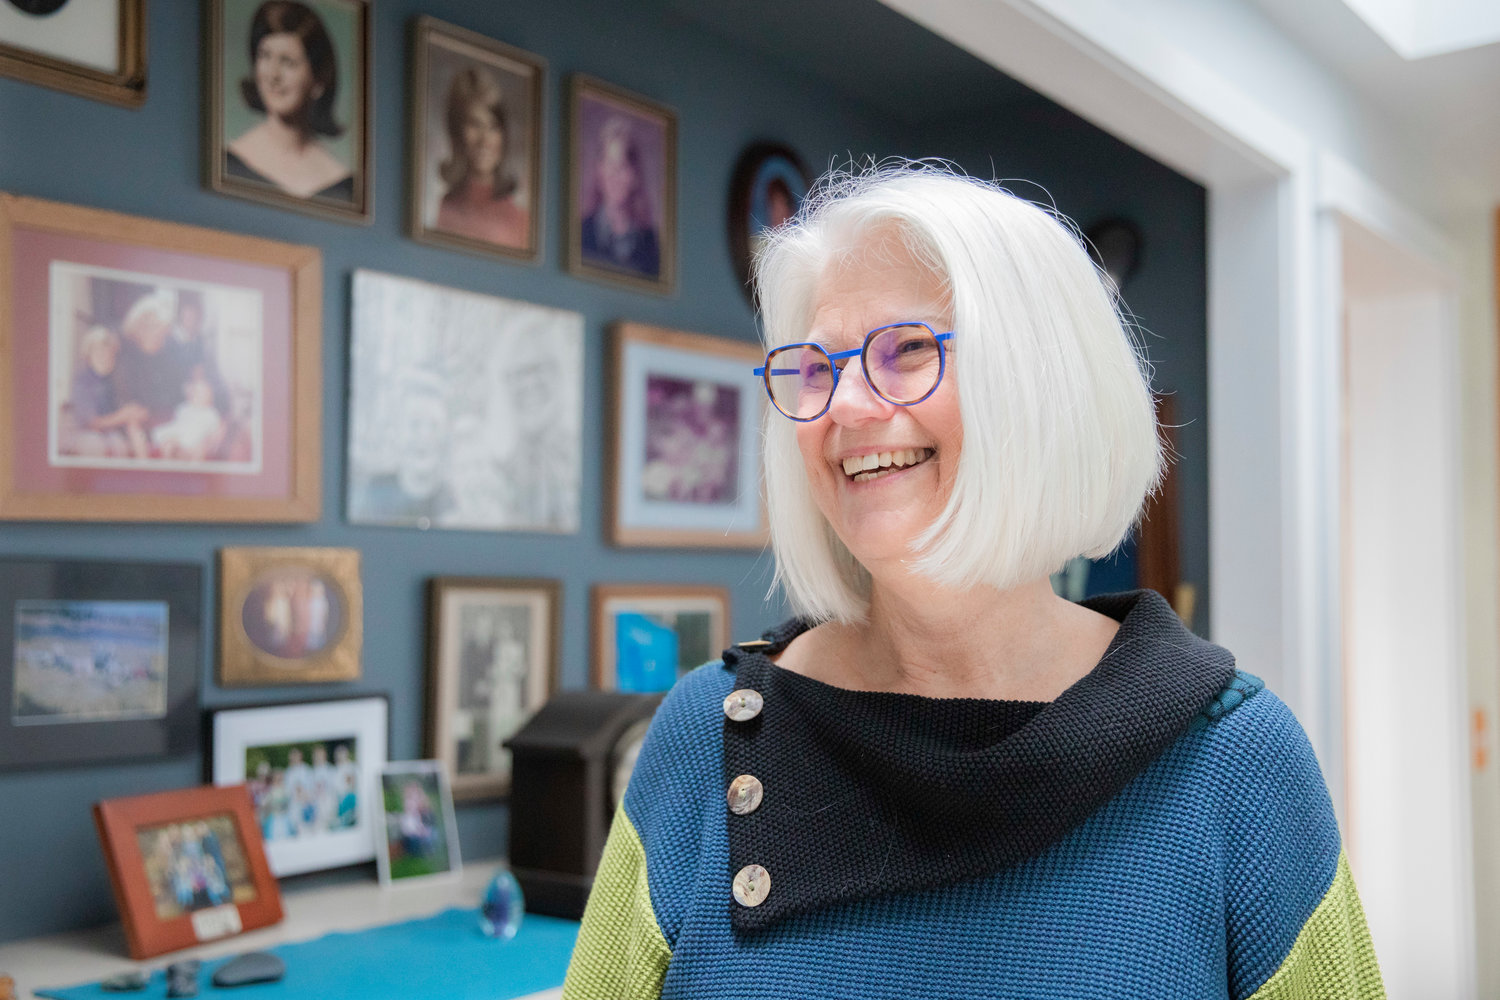 Gretchen Staebler smiles while talking about family in front of a wall full of portraits at her home off Seminary Hill Road in Centralia.